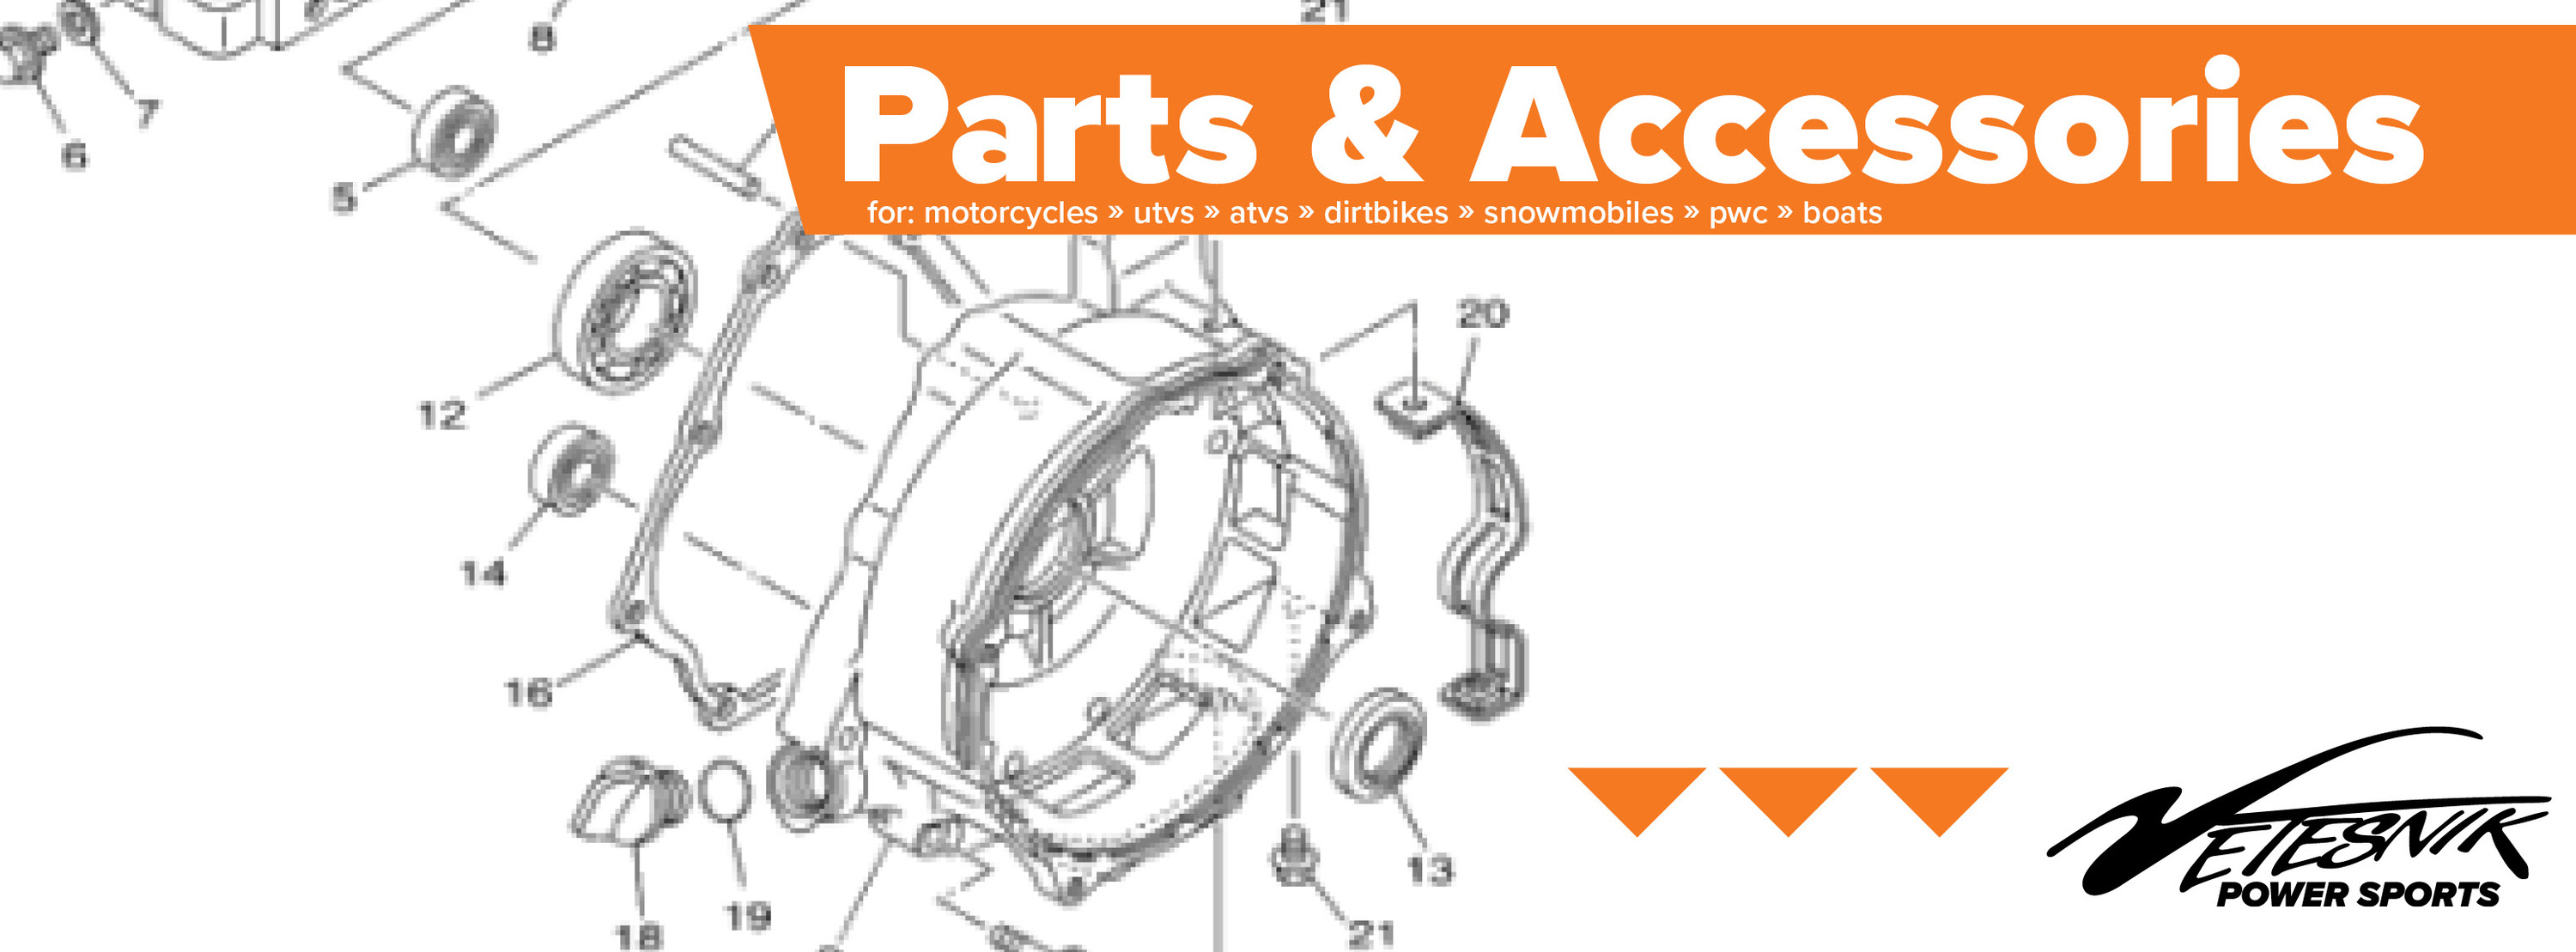 Parts and accessories